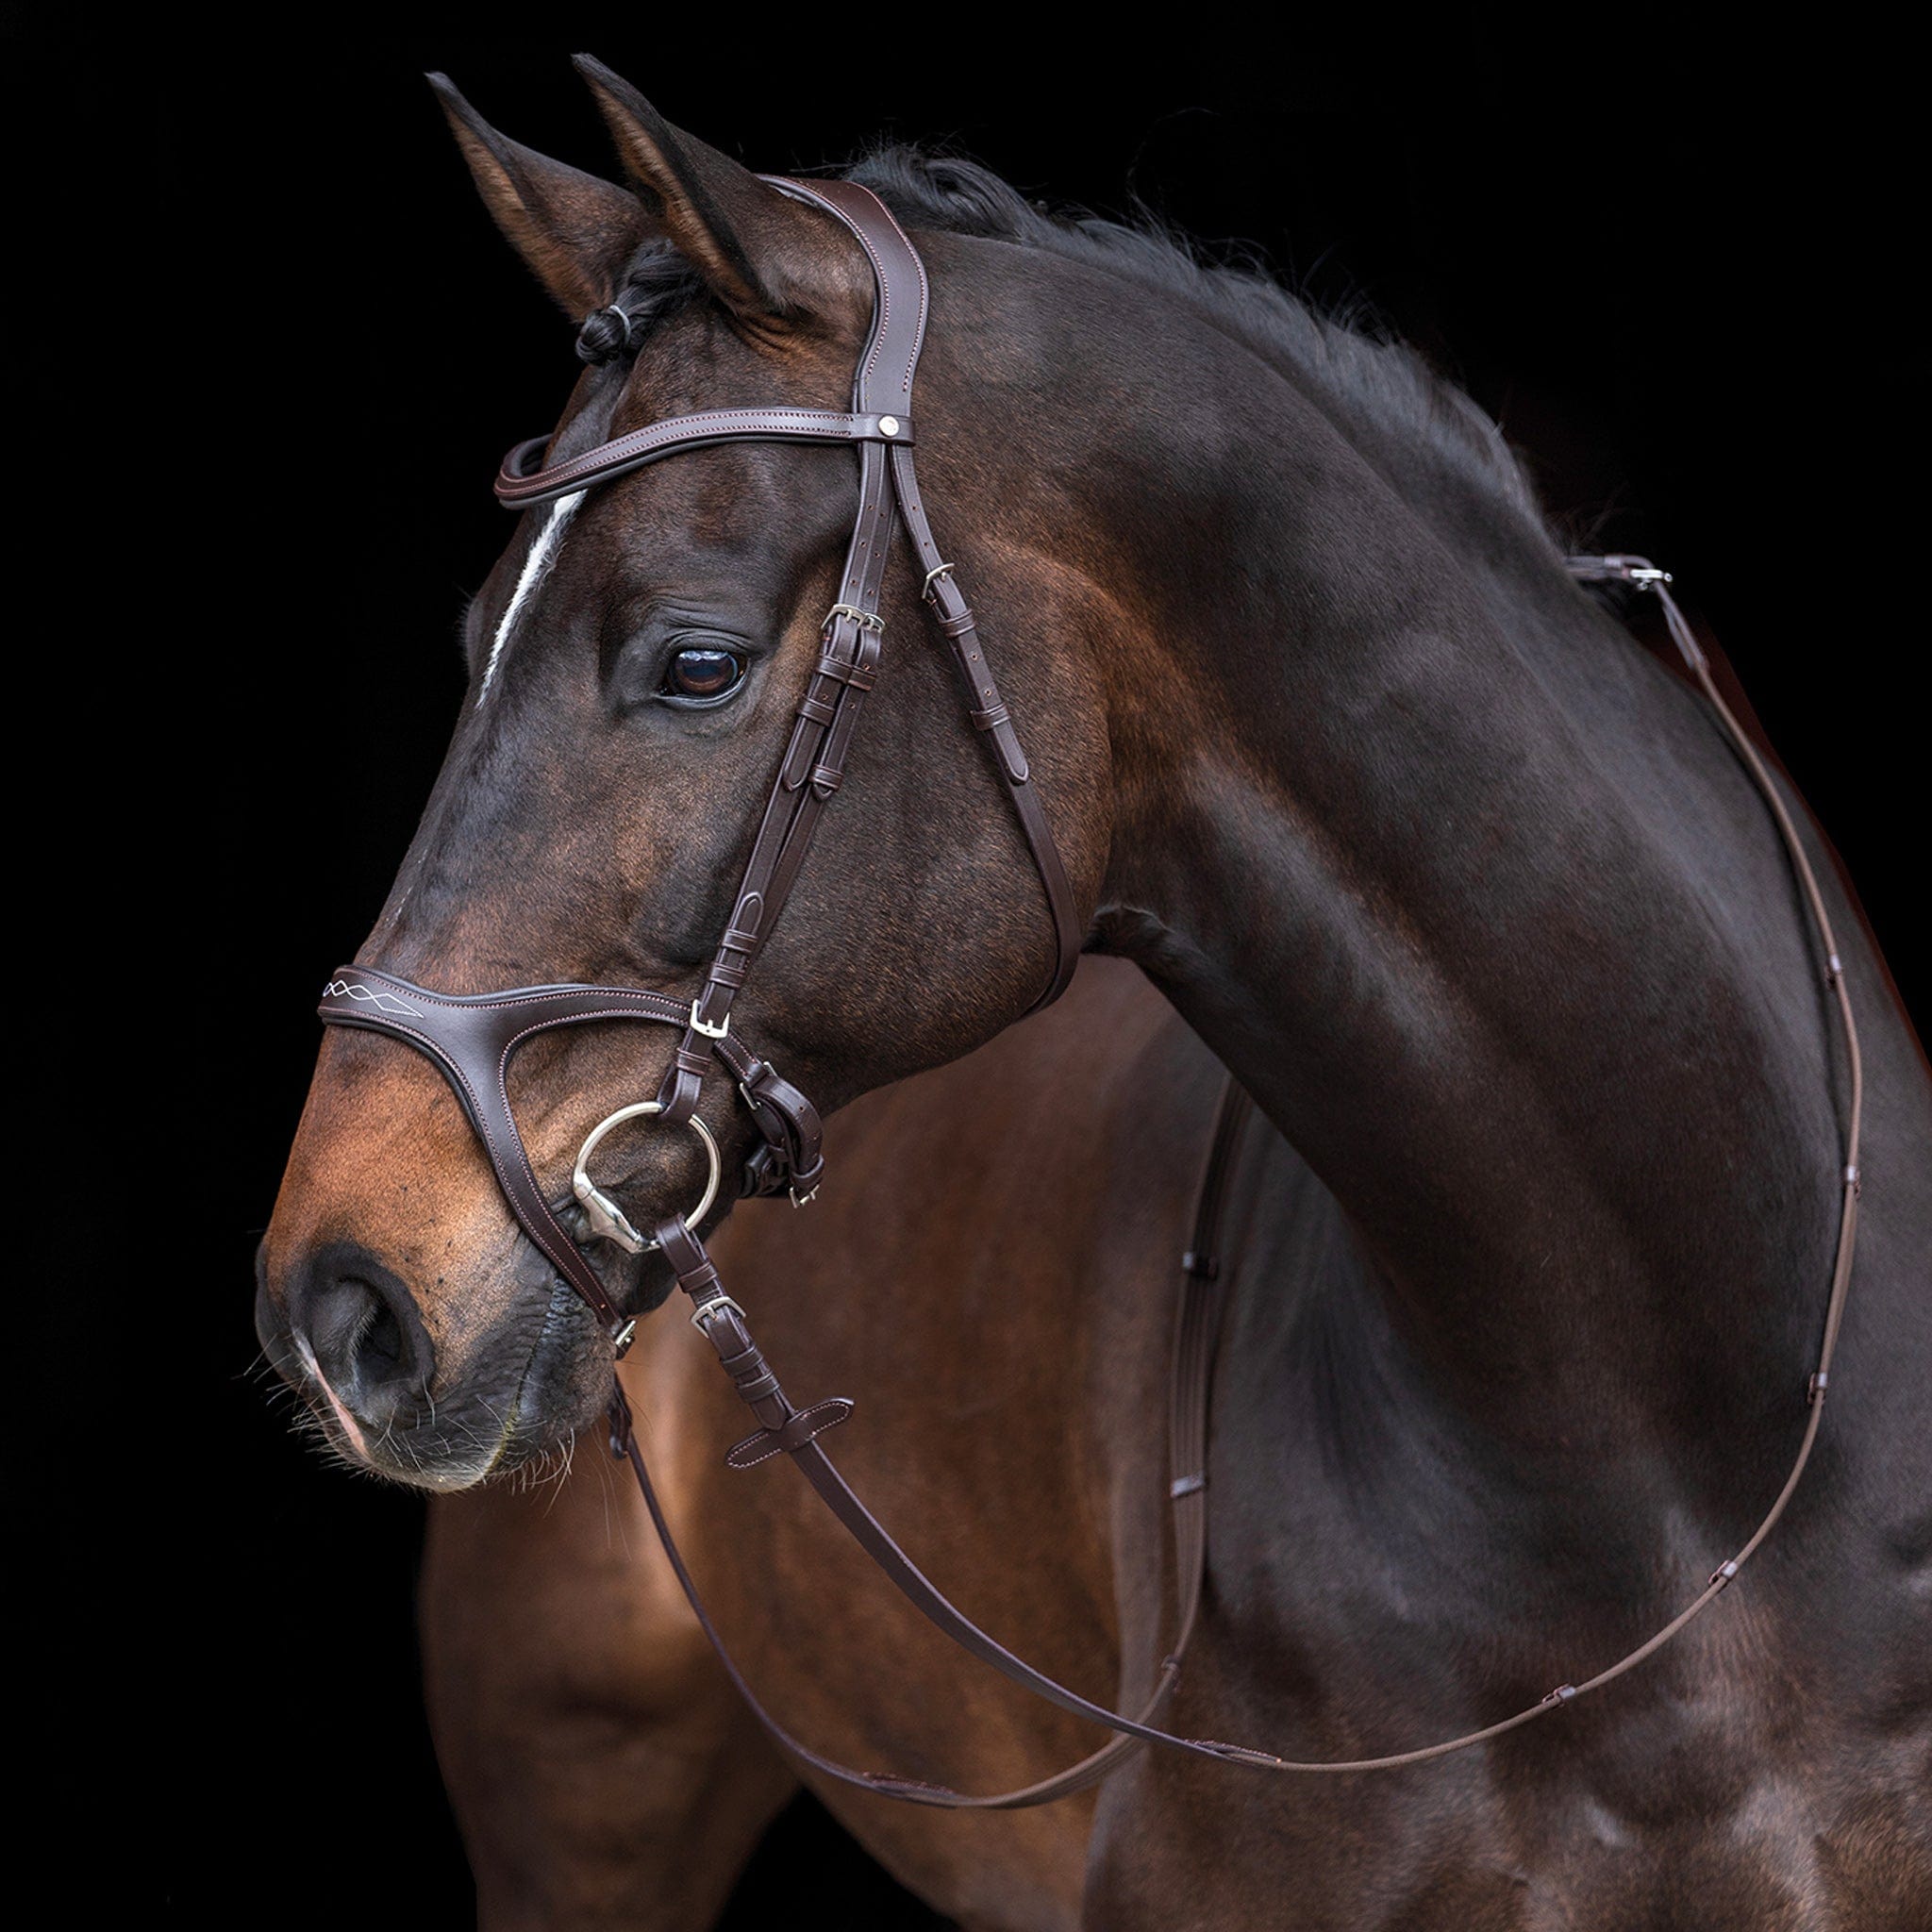 HKM Anatomical Sports Bridle Brown On Horse Front 11213